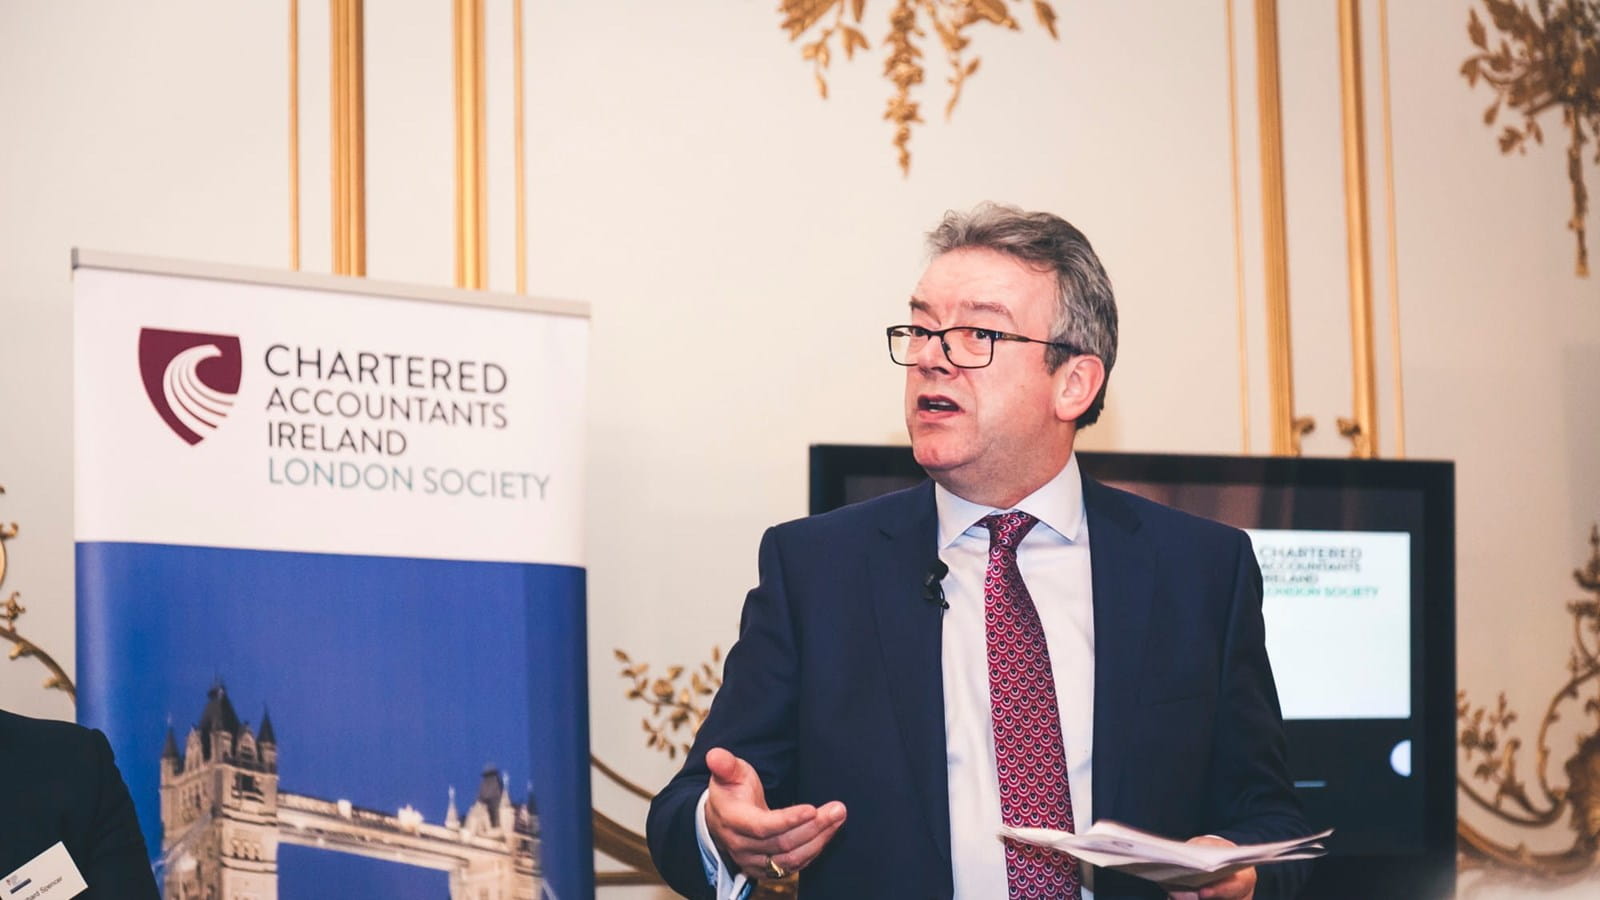 Dr Brian Keegan, Director of Advocacy and Voice for Chartered Accountants Ireland (CAI), speaking at a CAI London Society event in February 2020